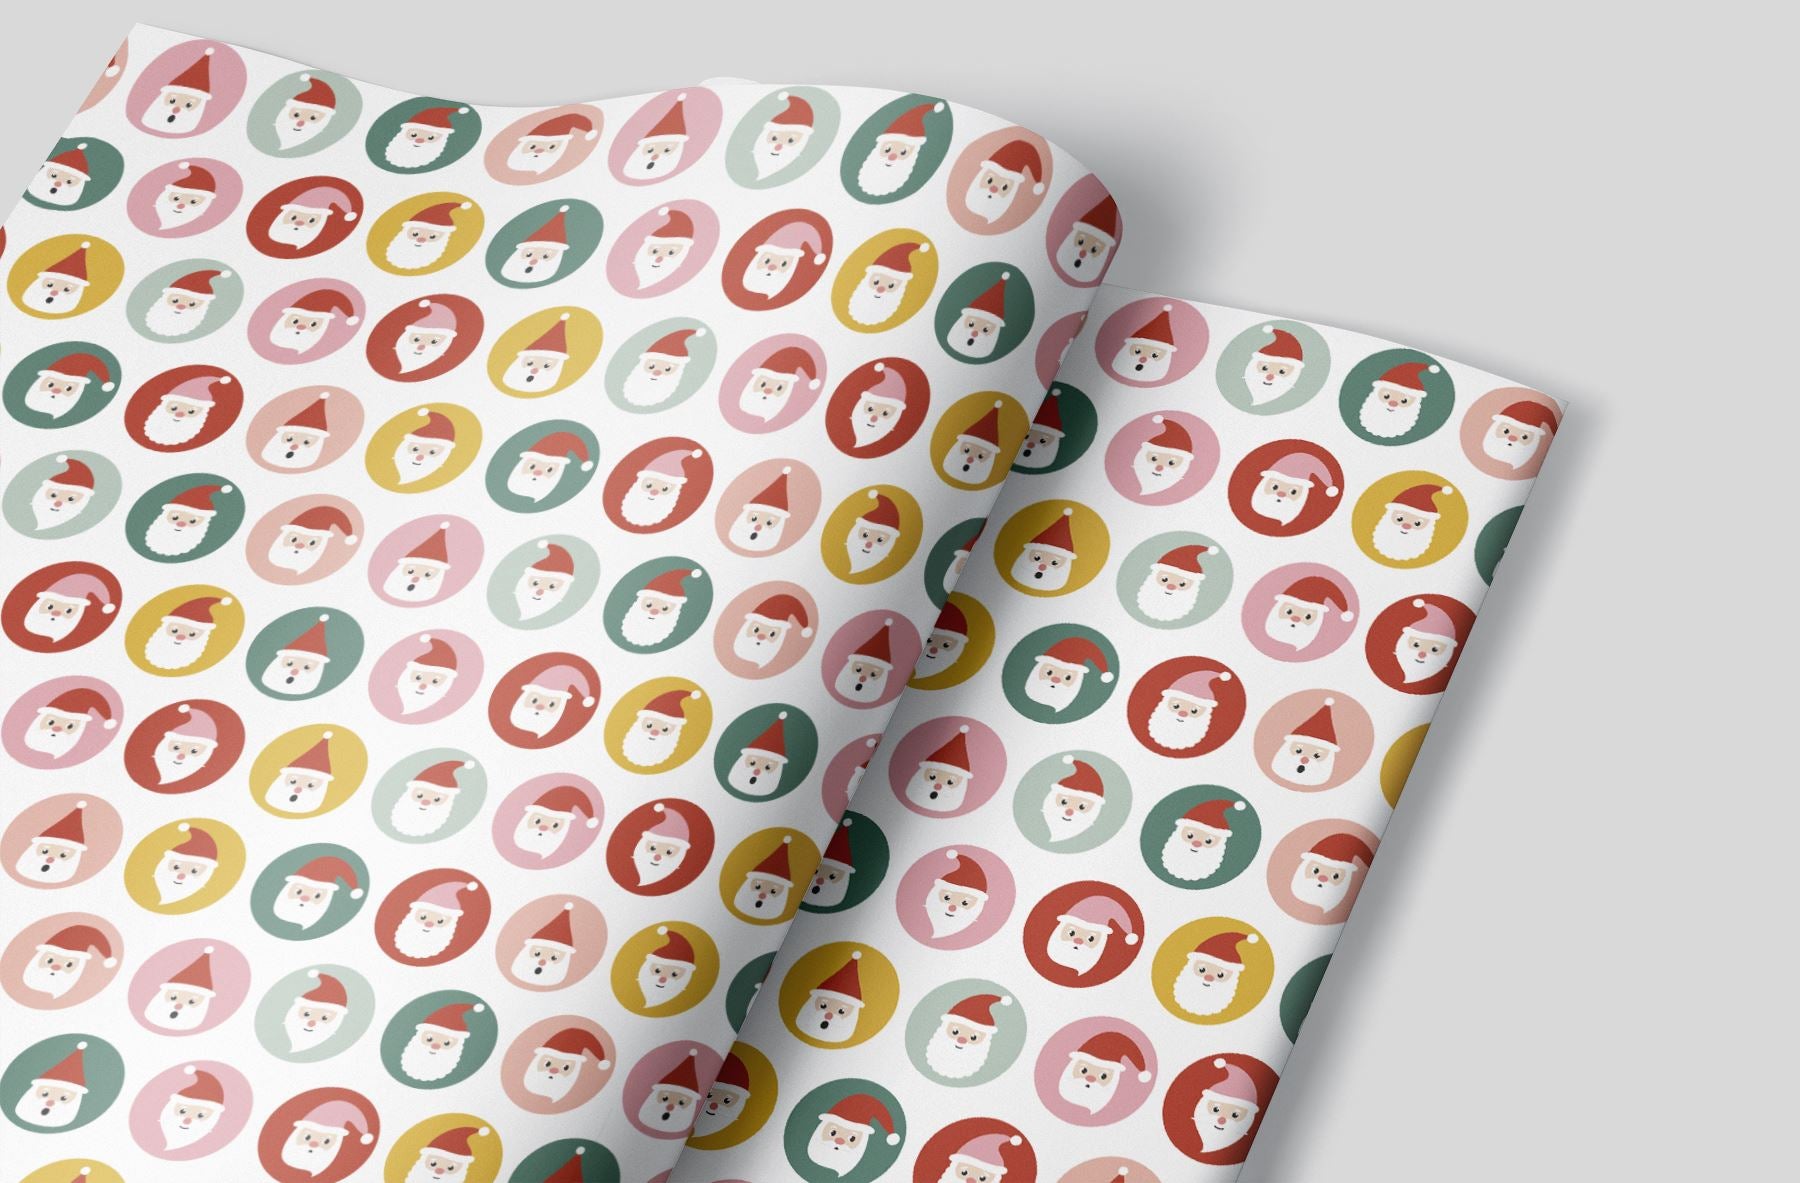 The Many Faces of Santa Wrapping Paper Alexander's 